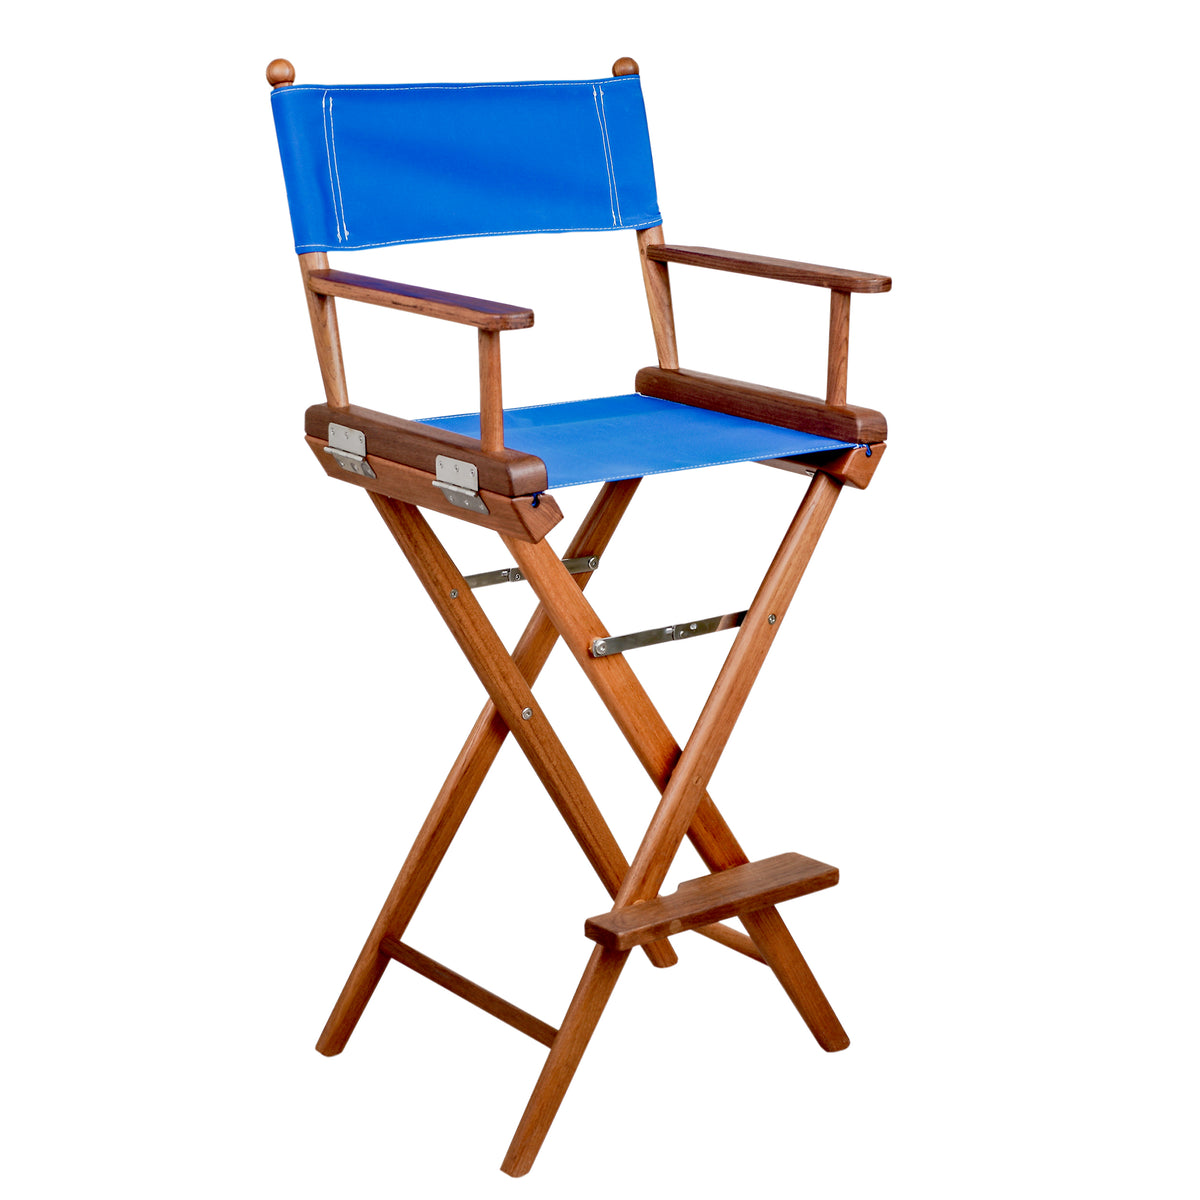 Captains Chair With Pacific Blue Seat Covers - 60045